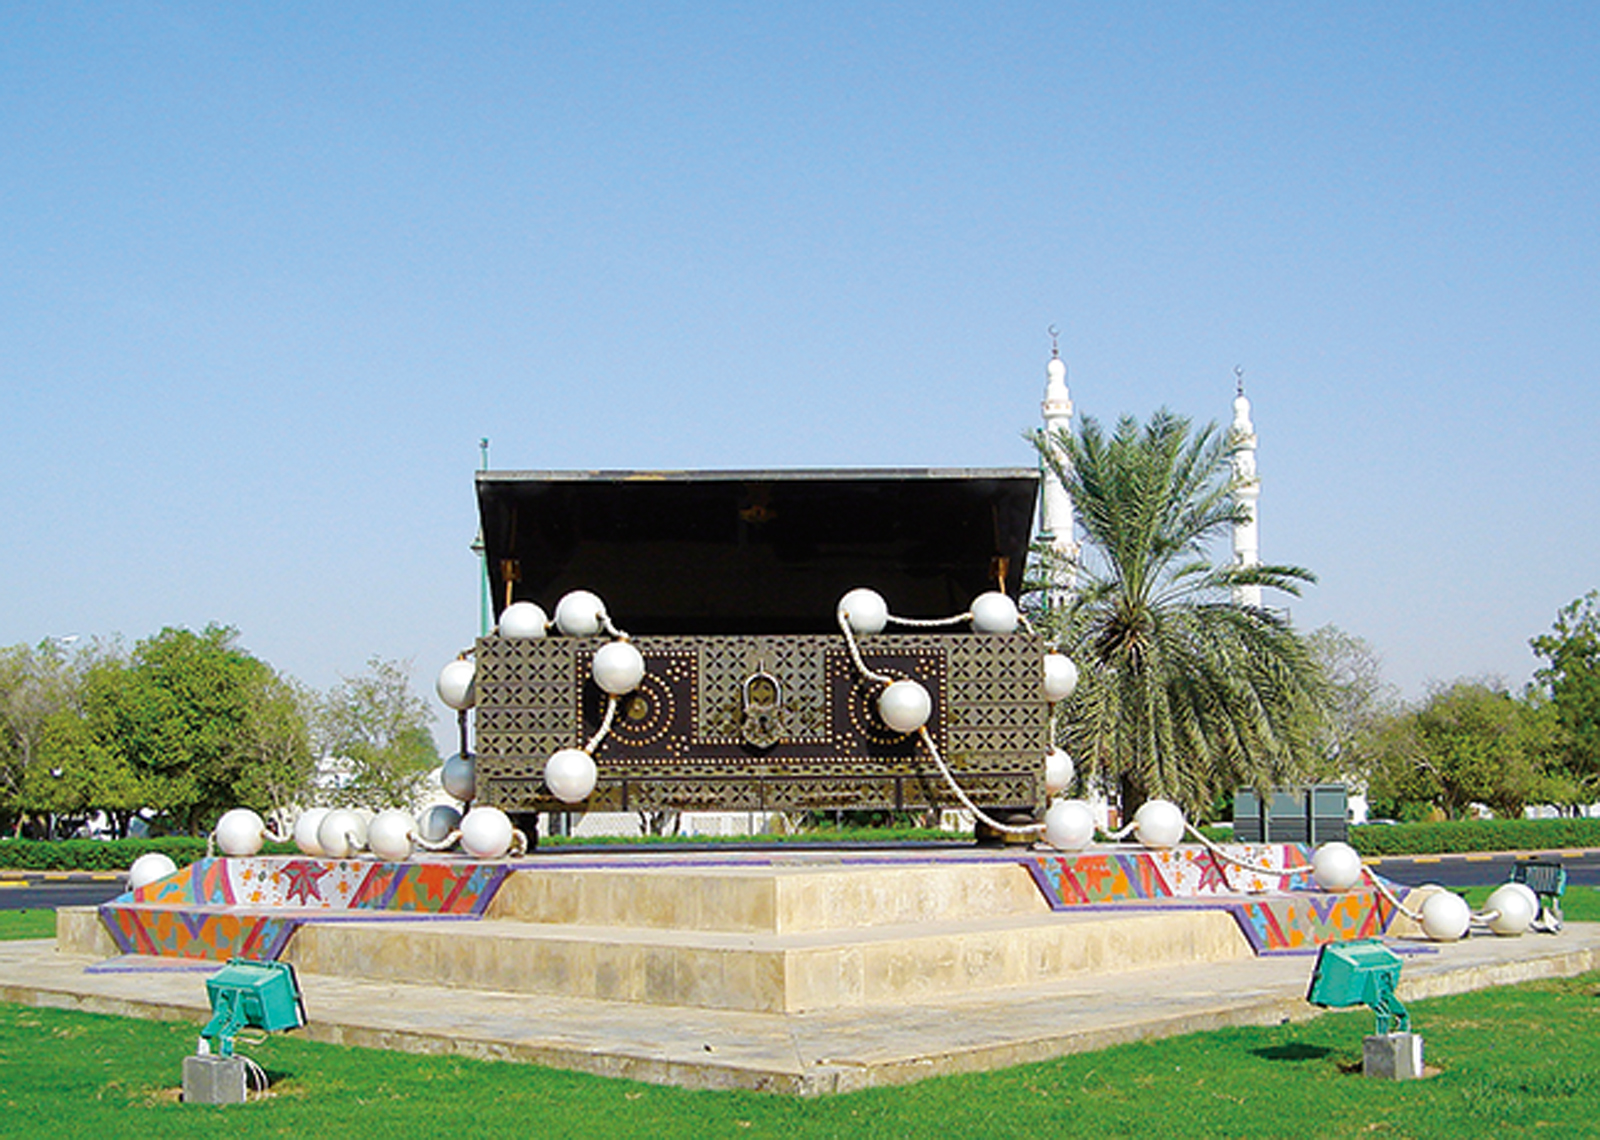 <p>The cultural role of the dowry chest is highlighted in Al Ain, United Arab Emirates, in this public artwork in a traffic roundabout.</p>